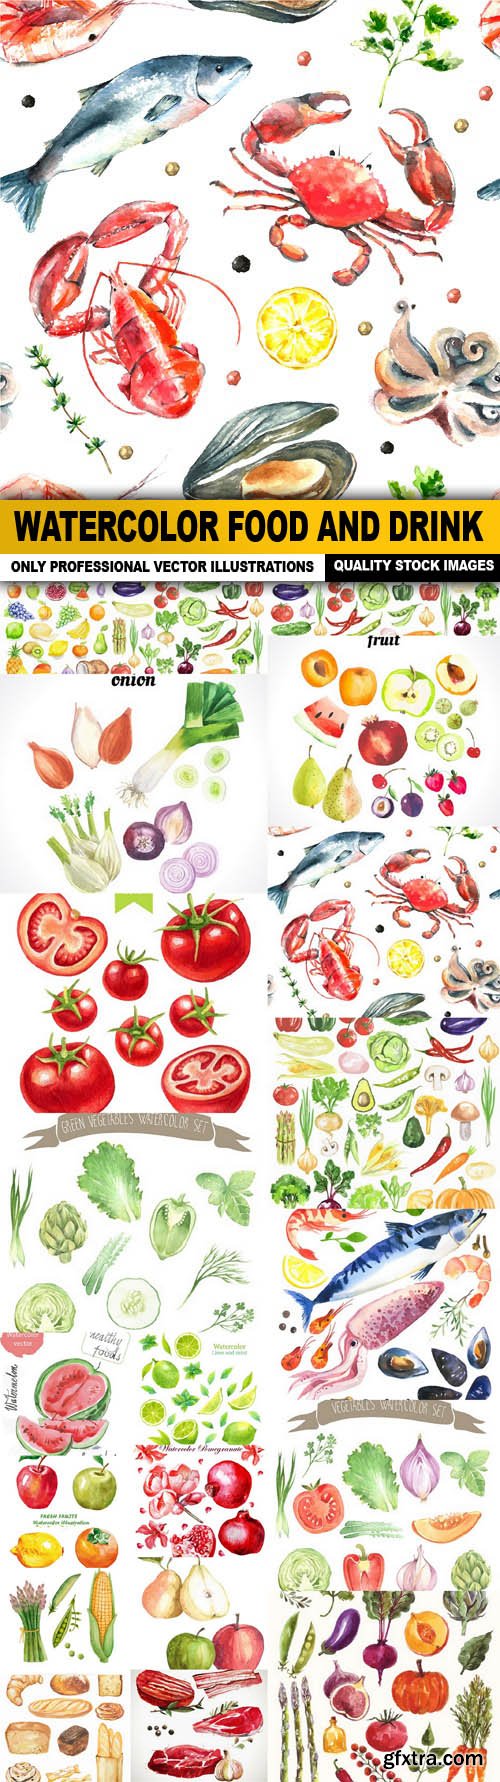 Watercolor Food And Drink - 20 Vector